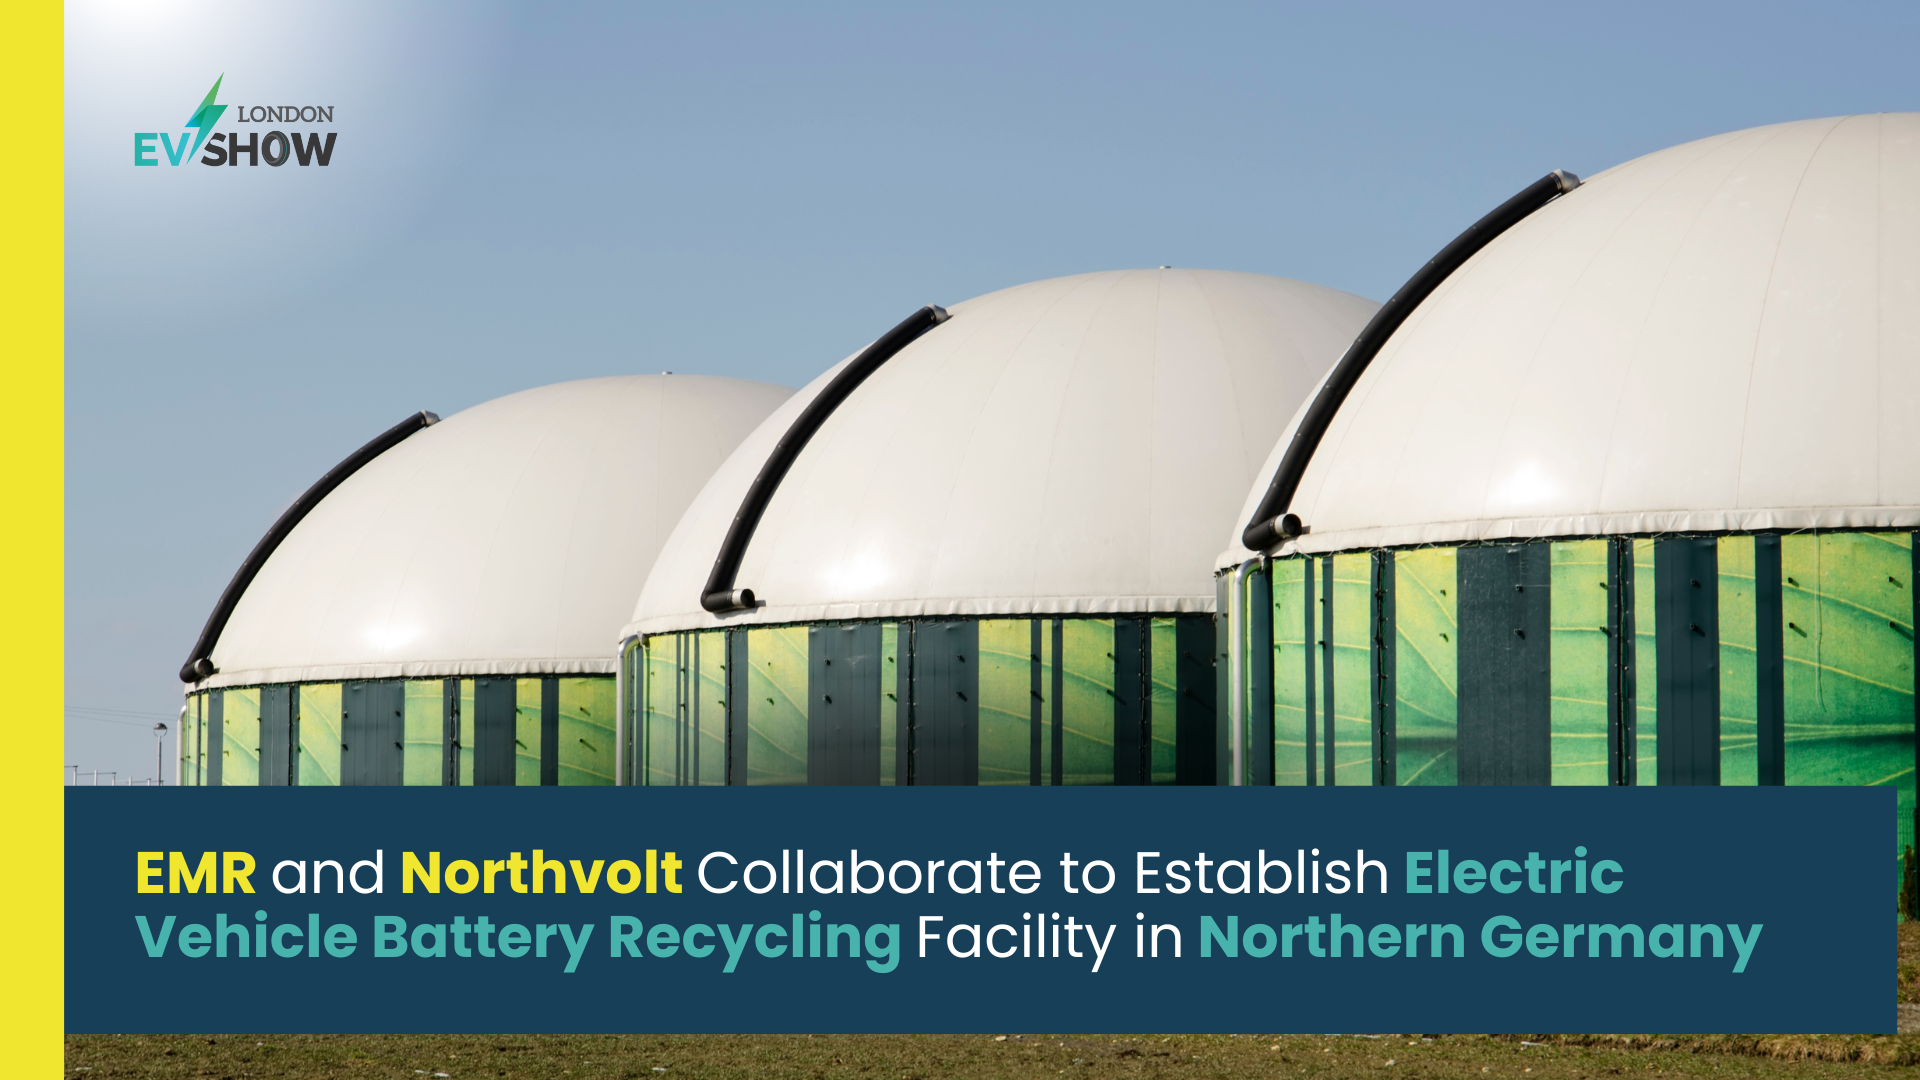 EMR and Northvolt Collaborate to Establish Electric Vehicle Battery Recycling Facility in Northern Germany